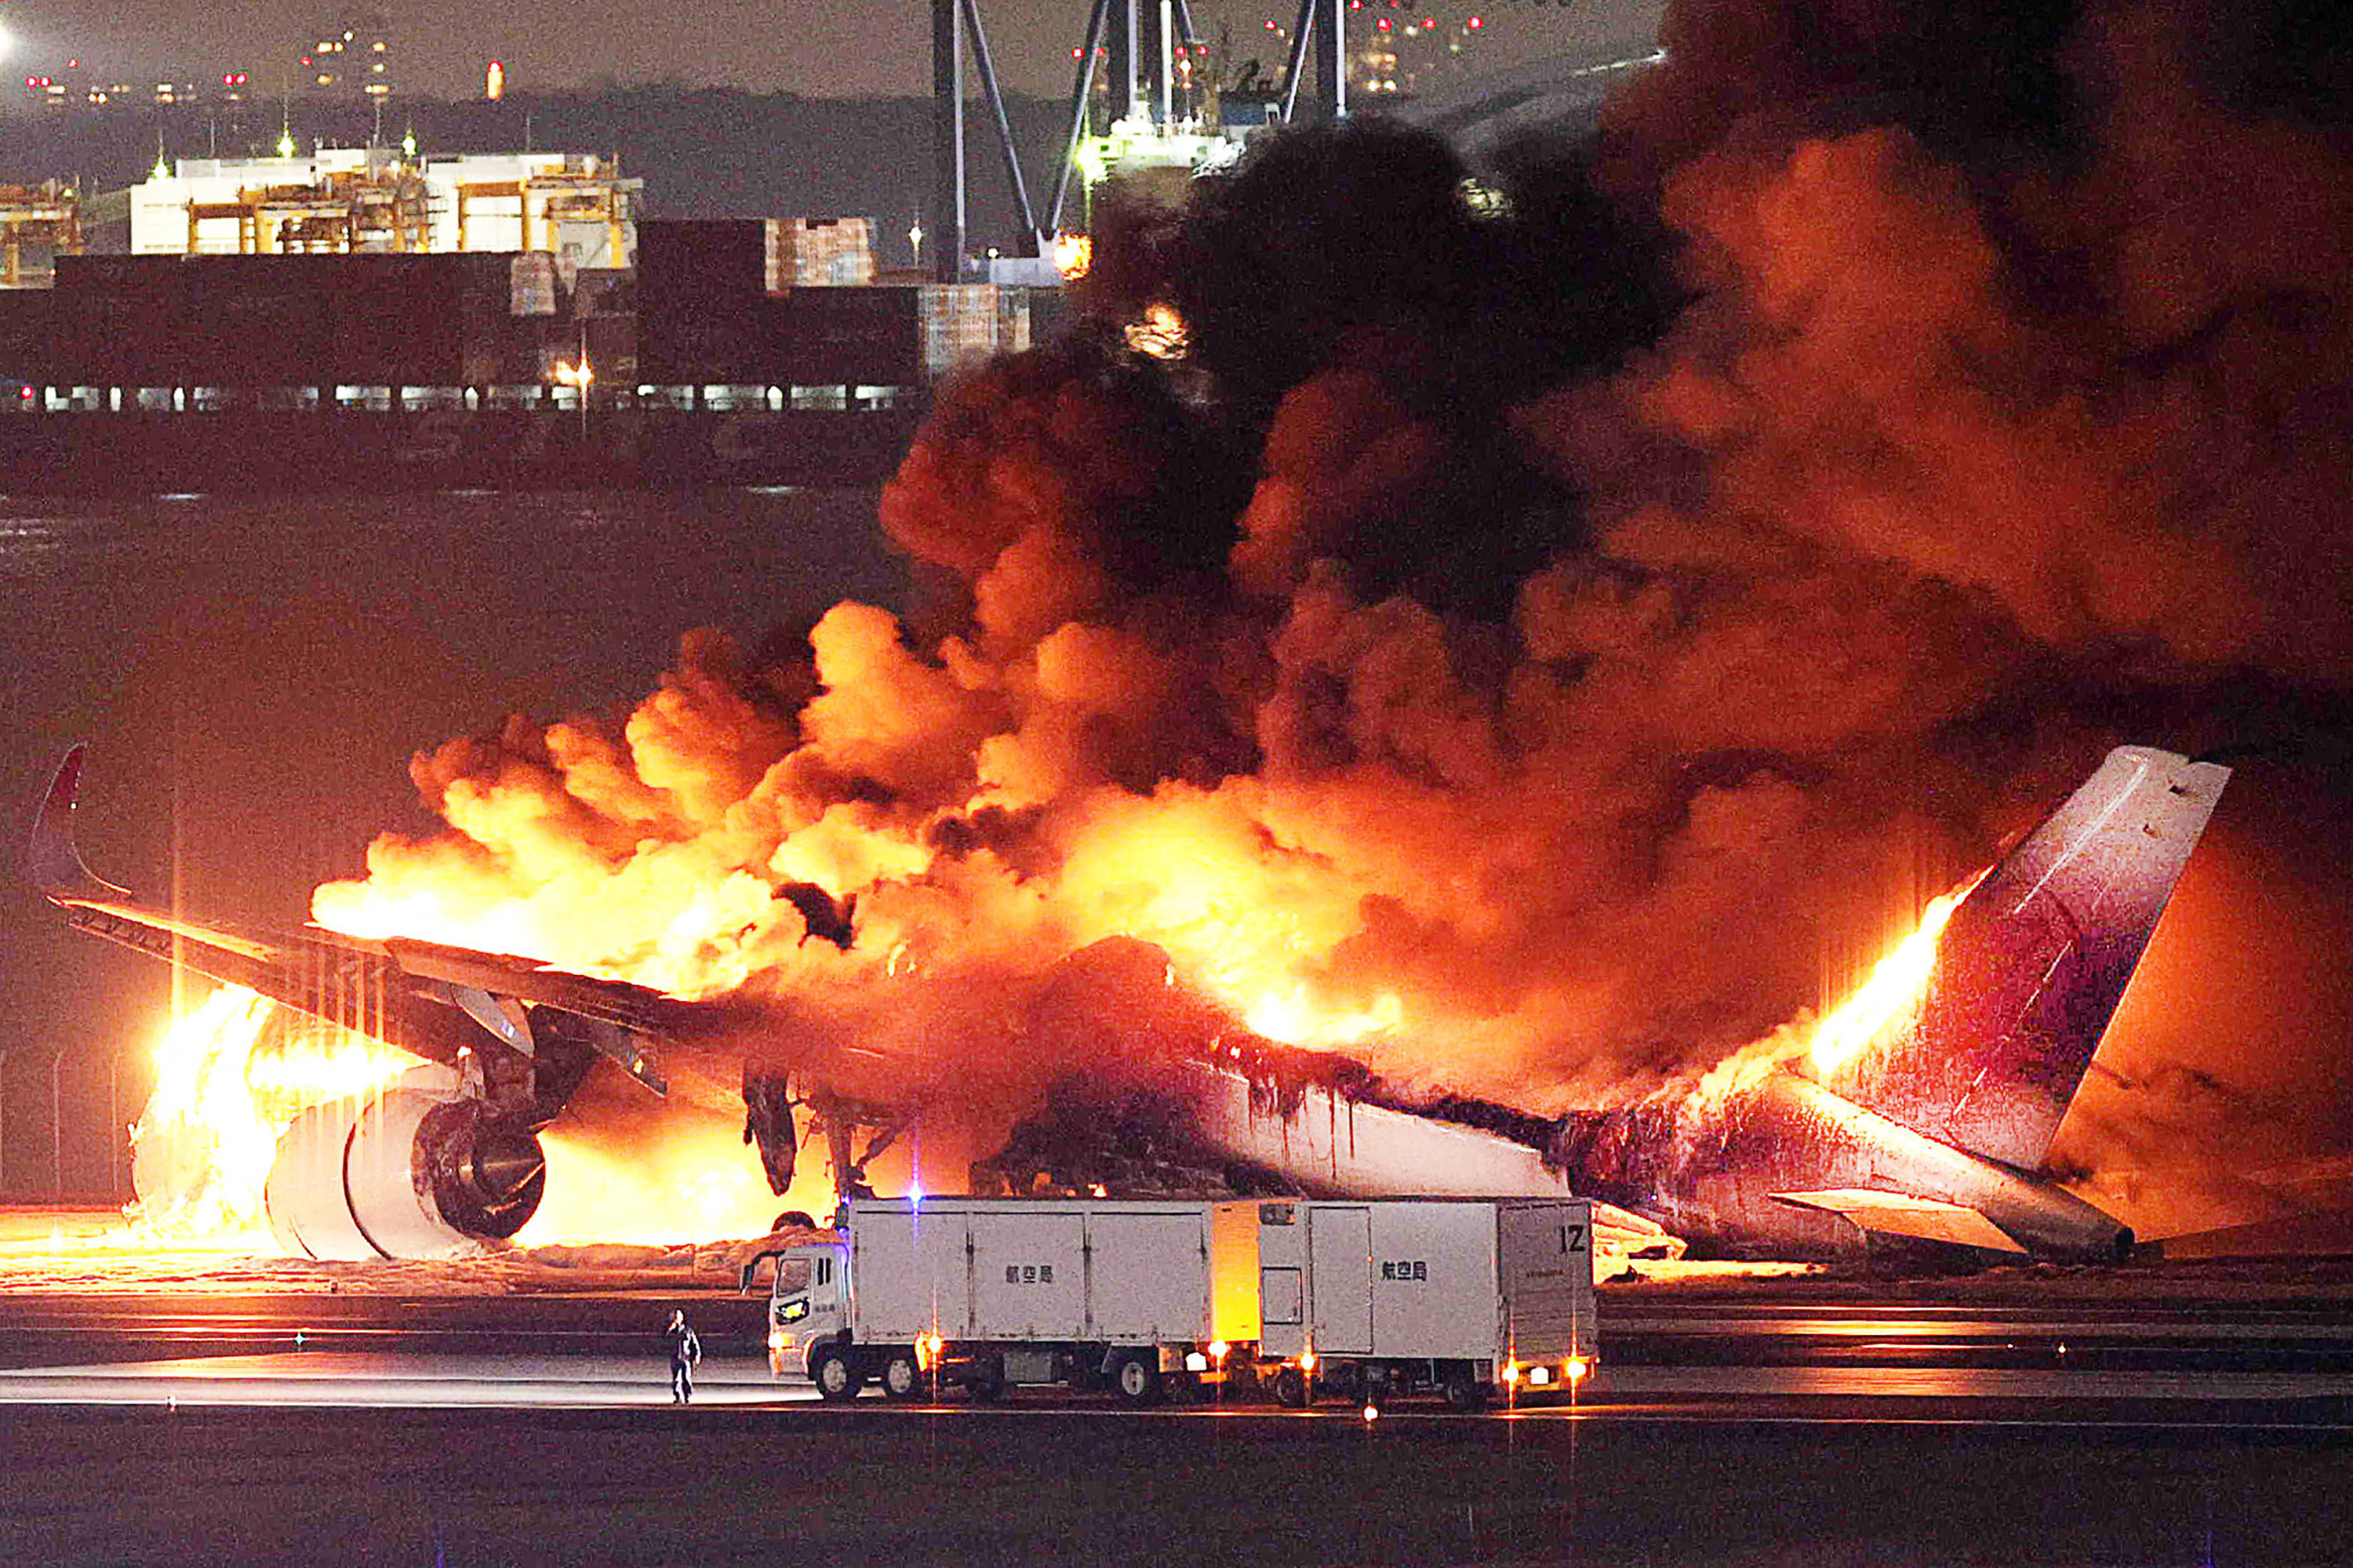 Transcripts from flight recorders revealed that a Japan Airlines passenger jet had permission to land before colliding with a coastguard aircraft on the runway at Tokyo’s Haneda airport. Photo: TNS